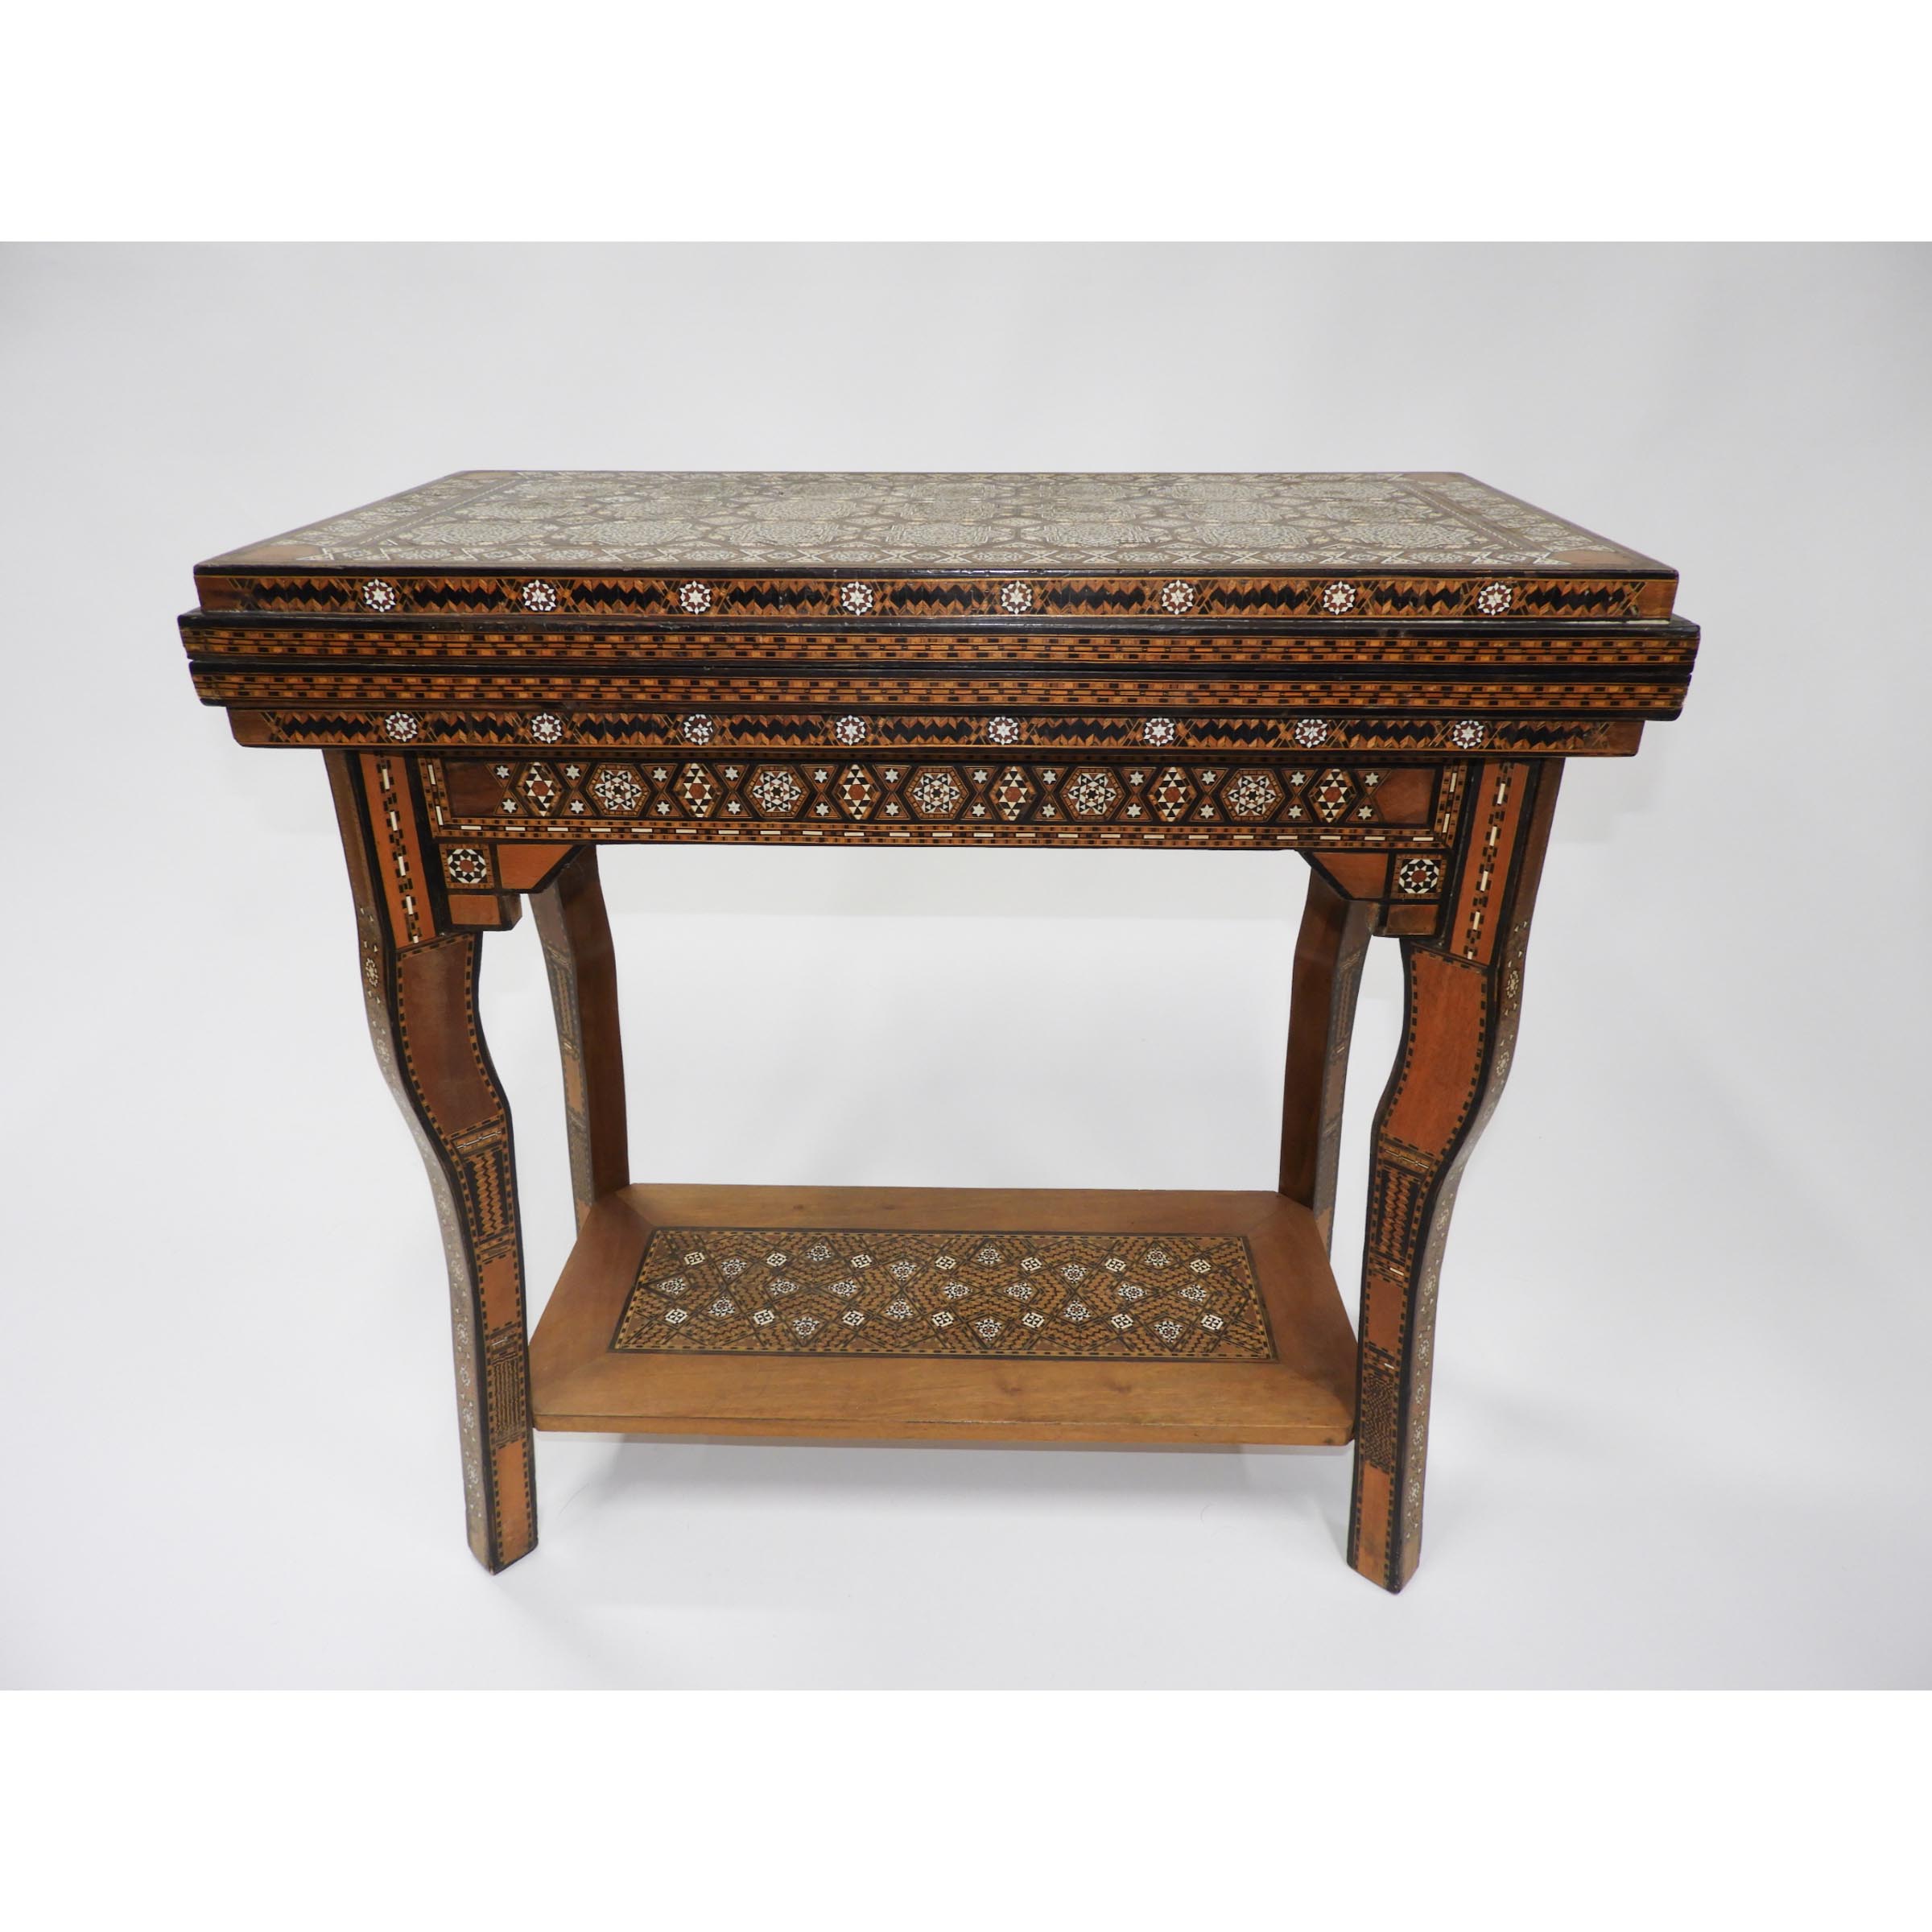 Syrian Inlaid Games Table mid 20th